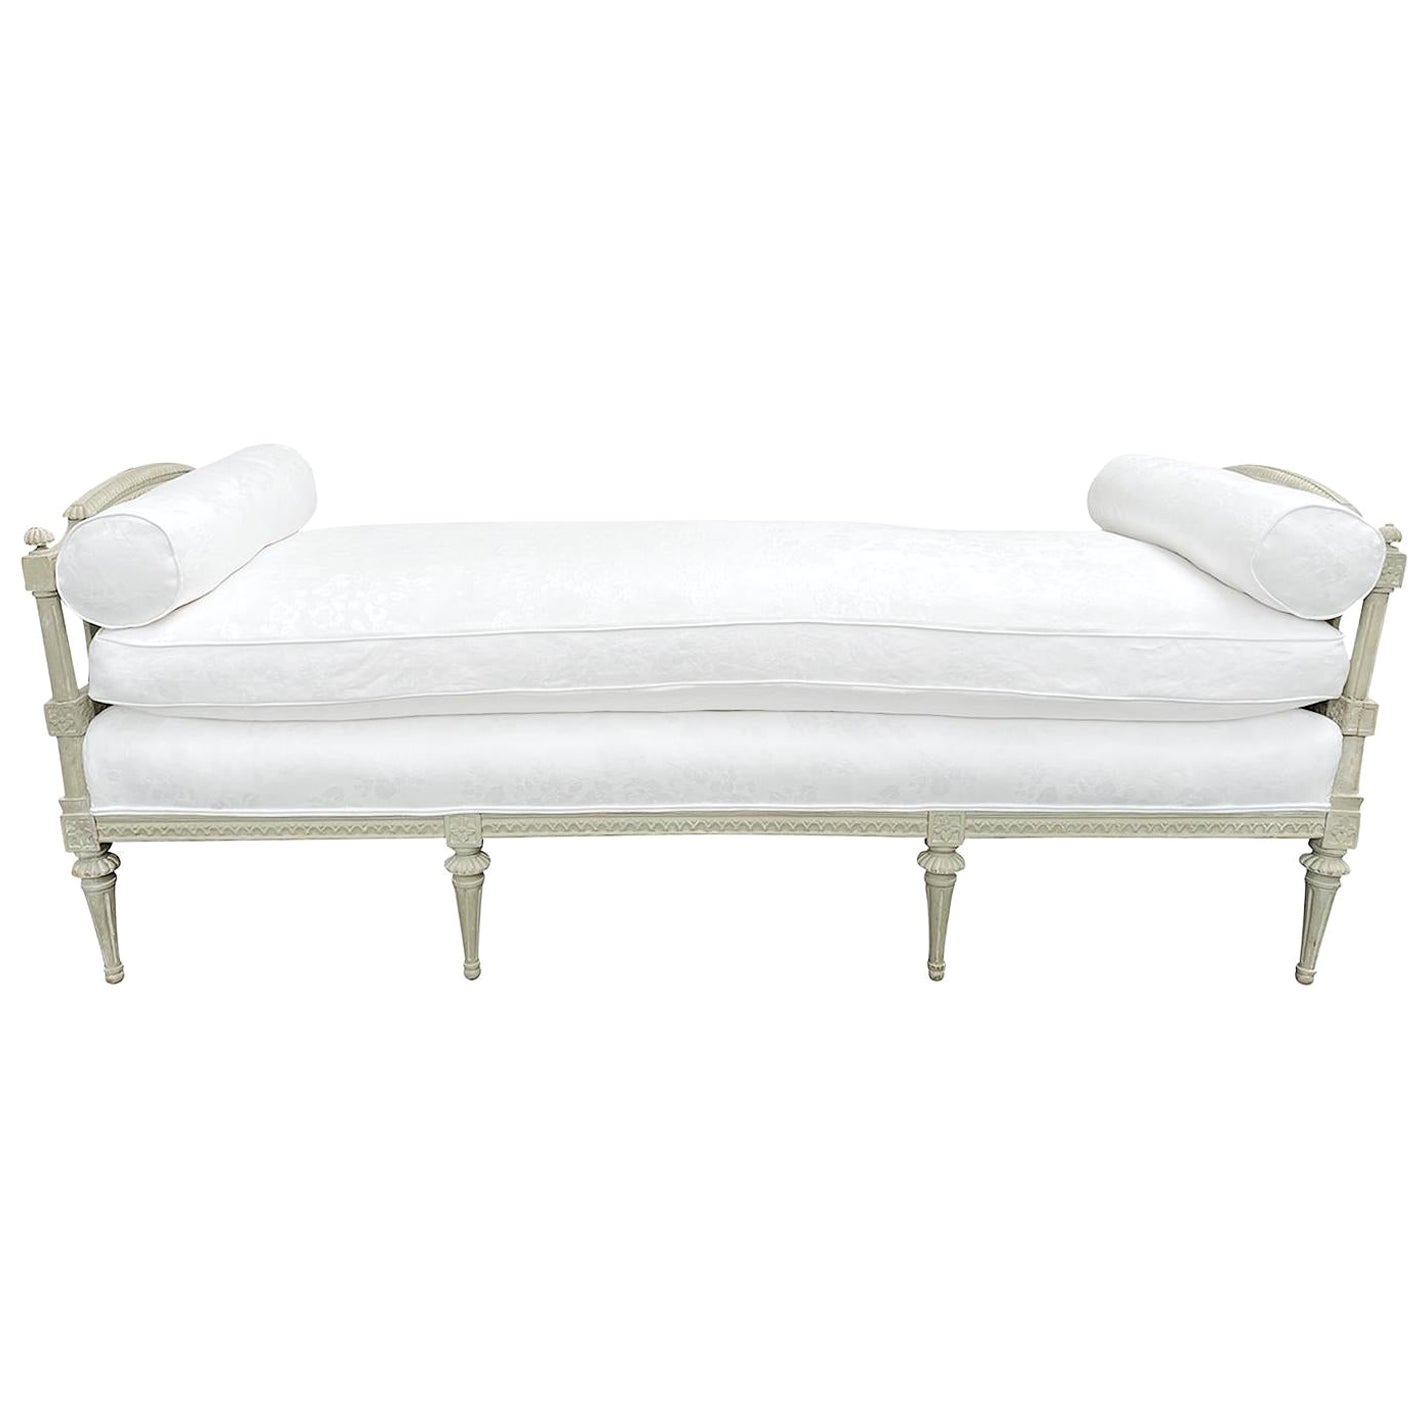 18th-19th Century White Swedish Gustavian Pinewood Daybed, Antique Sofa Bench For Sale